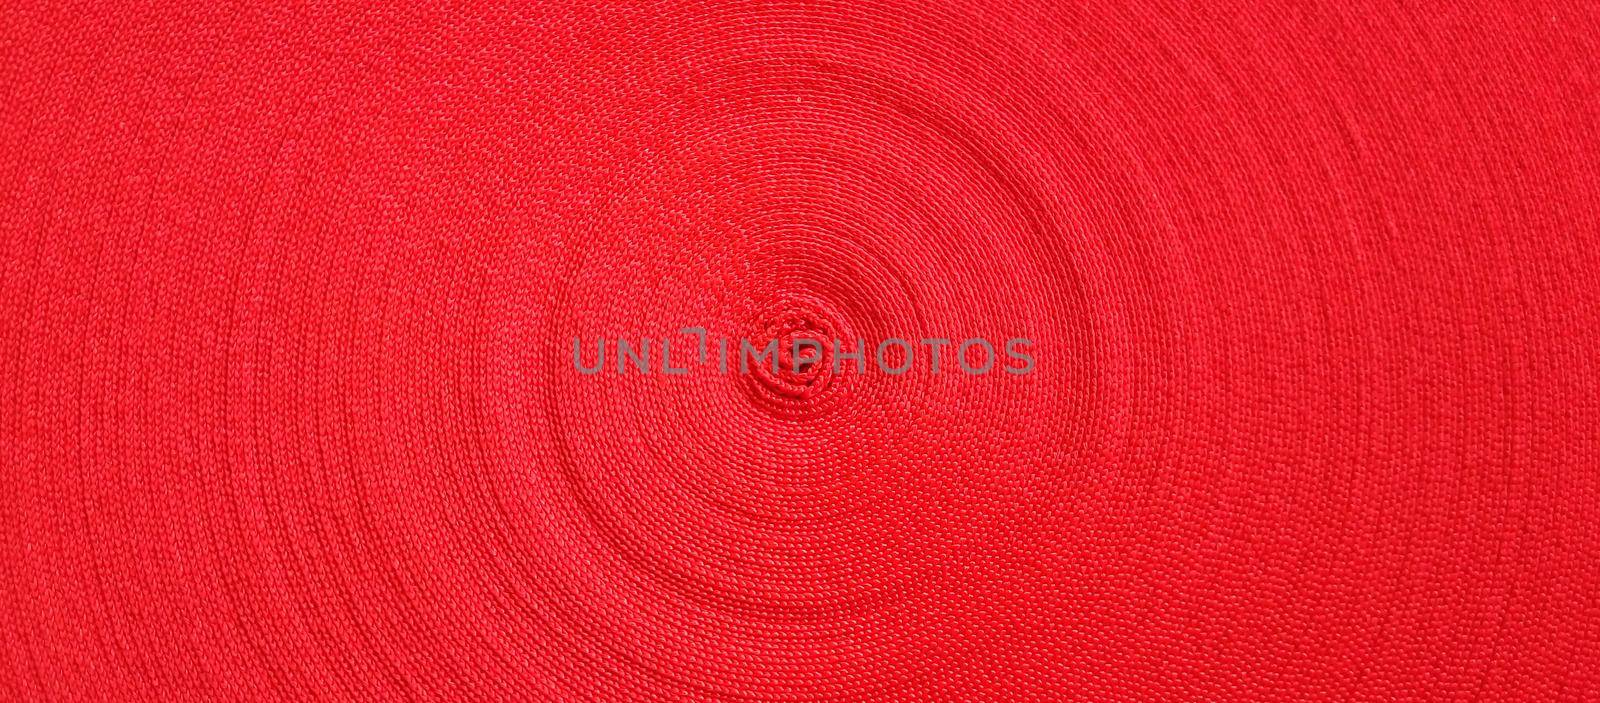 Red abstract circular pattern made of red sling.